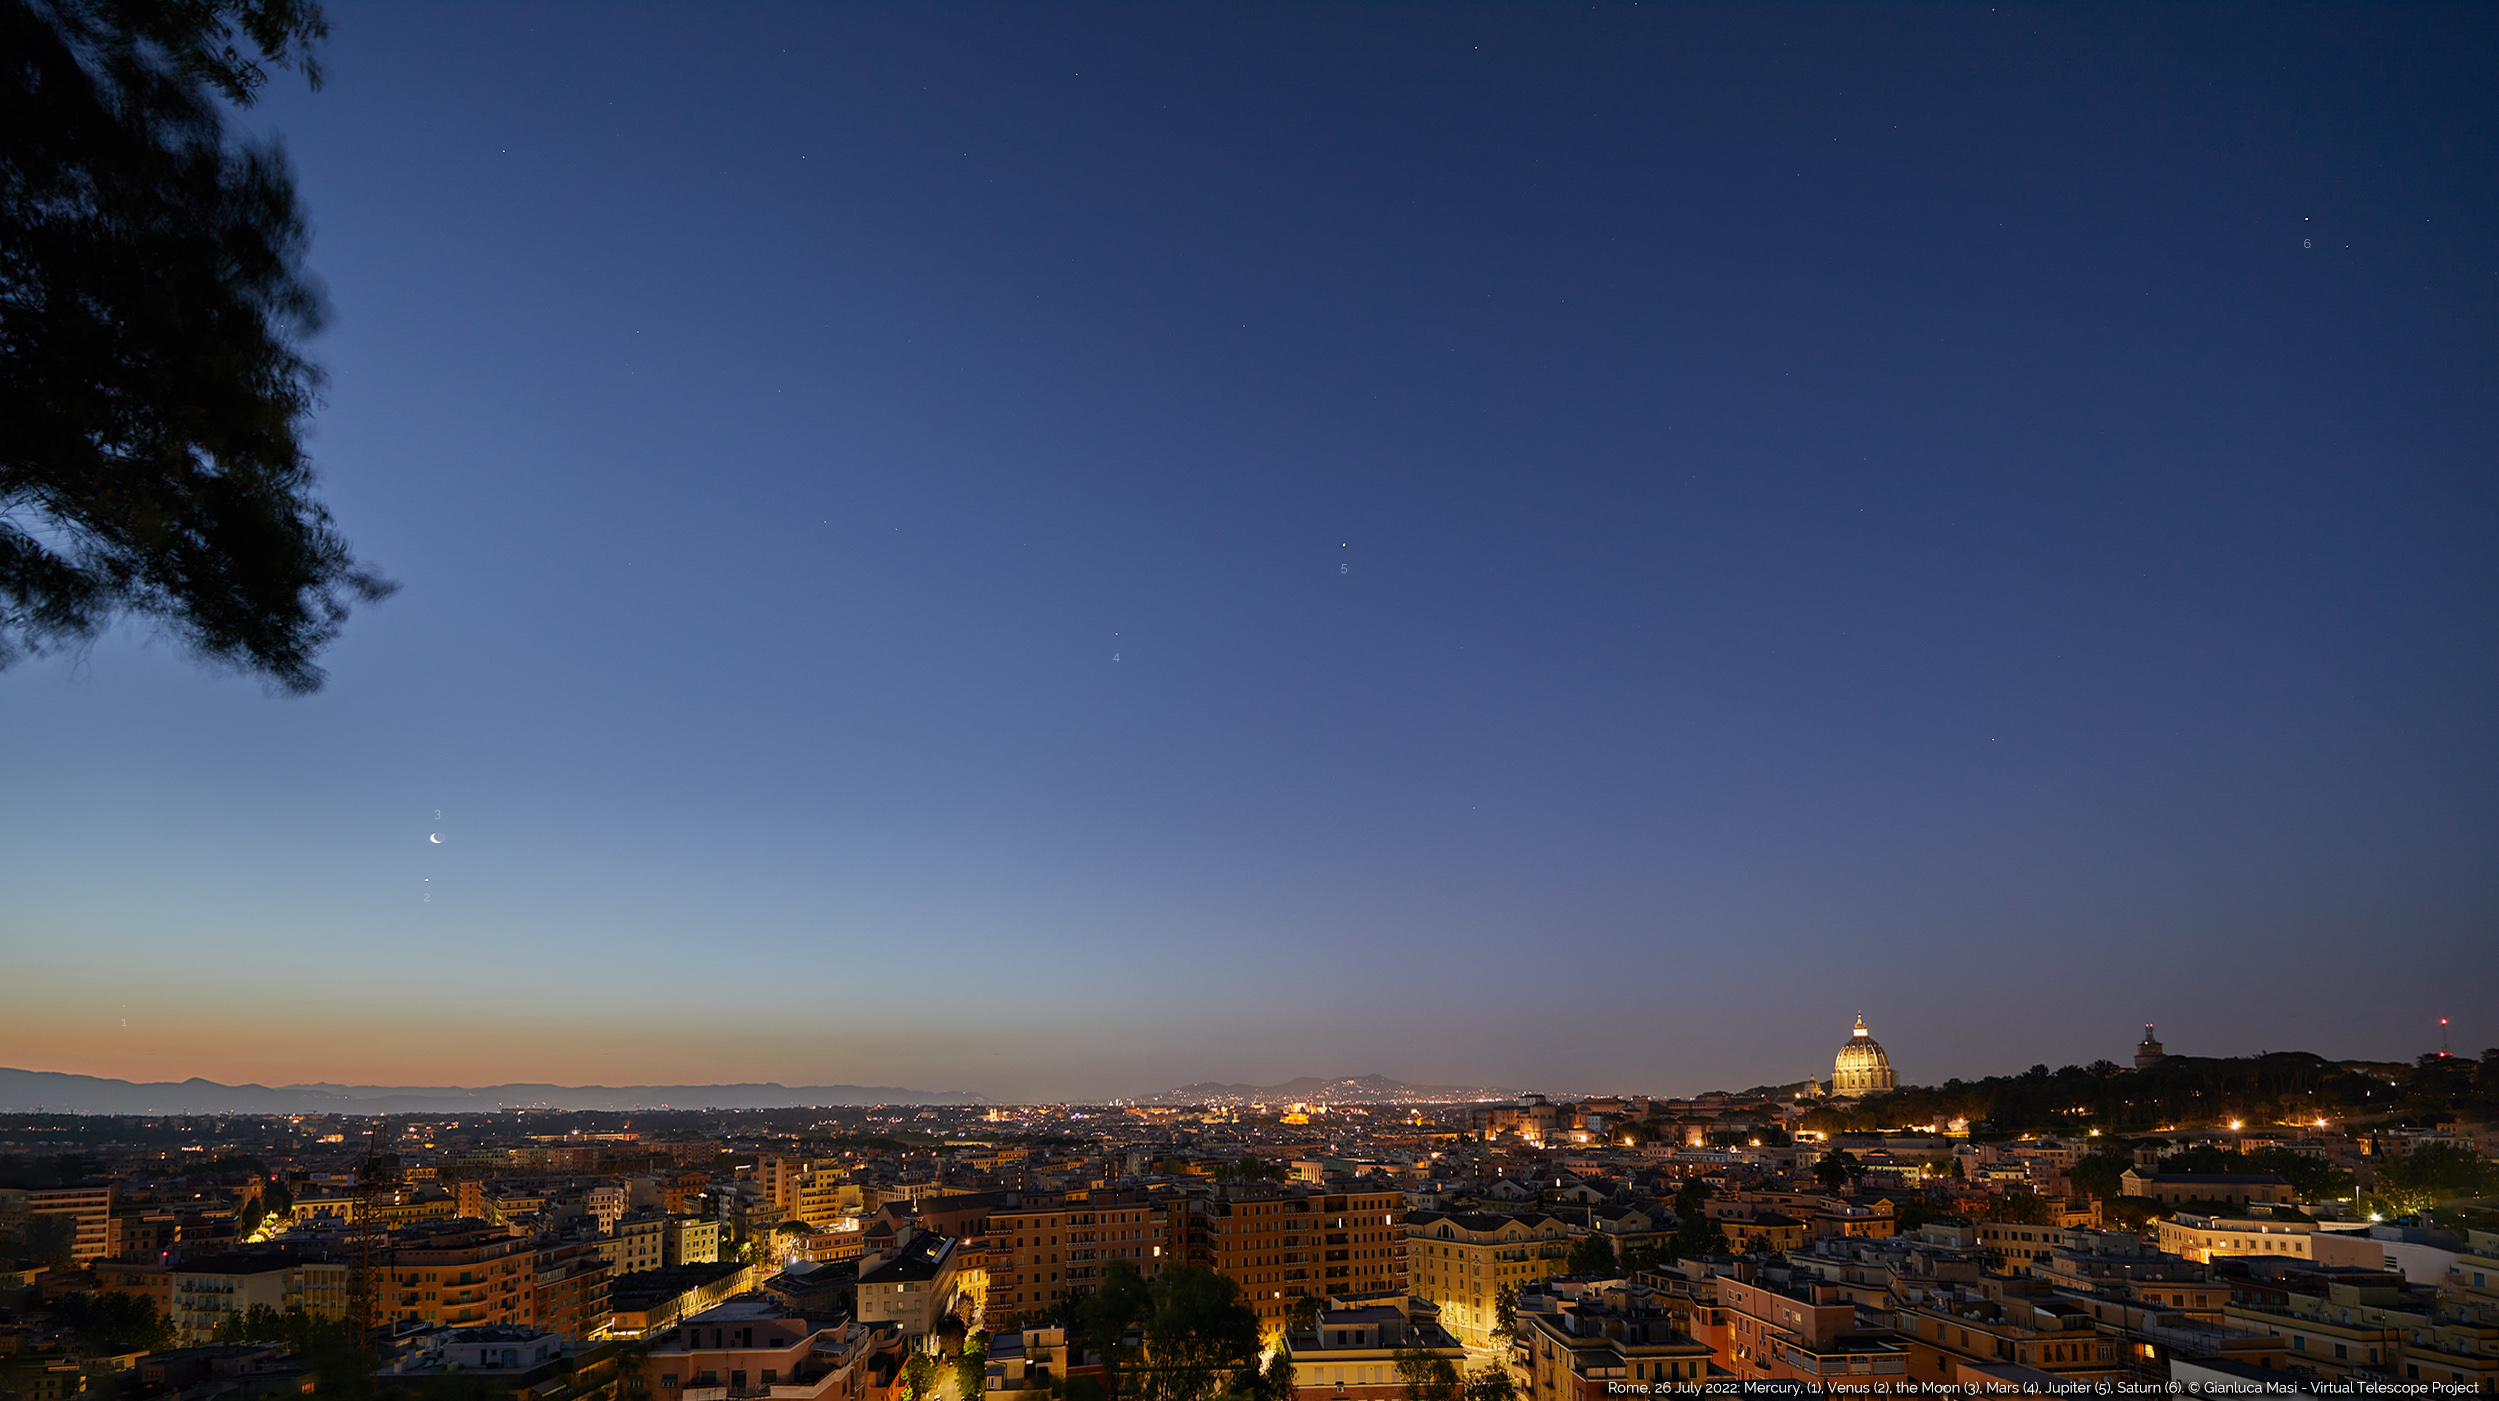 While waiting for Mercury to rise, four planets with the Moon hang above Rome. Pleiades are also visible, as well as St. Peter’s Dome. 26 June 2022.